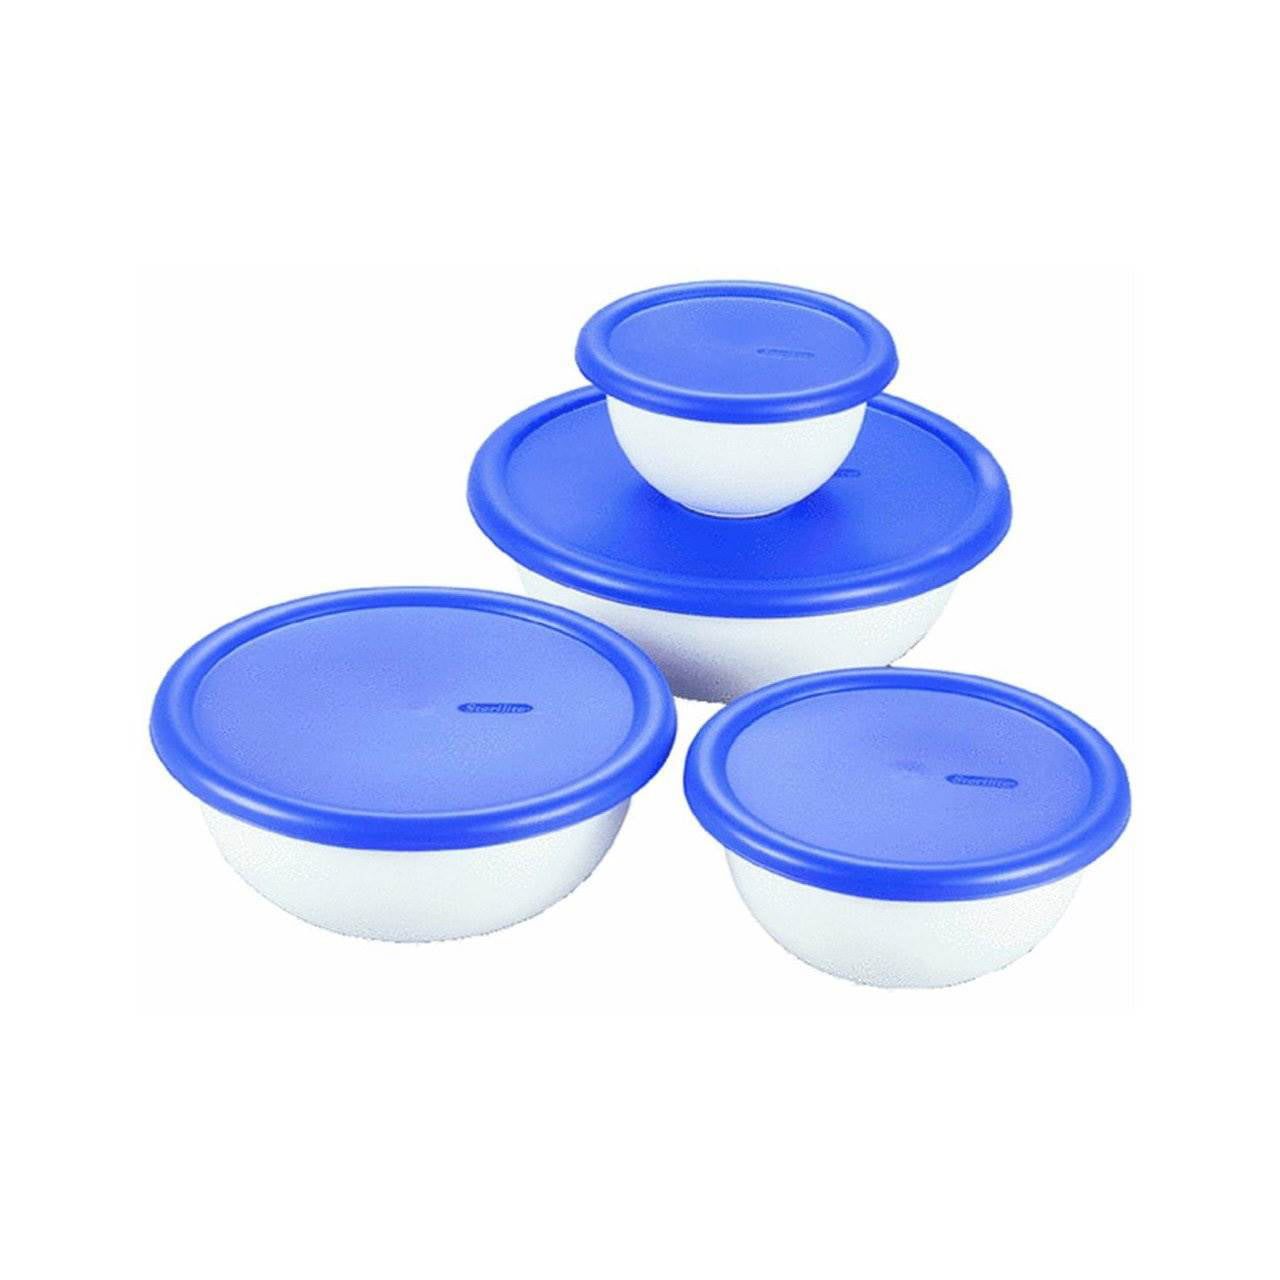 plastic bowls with lids at amazon